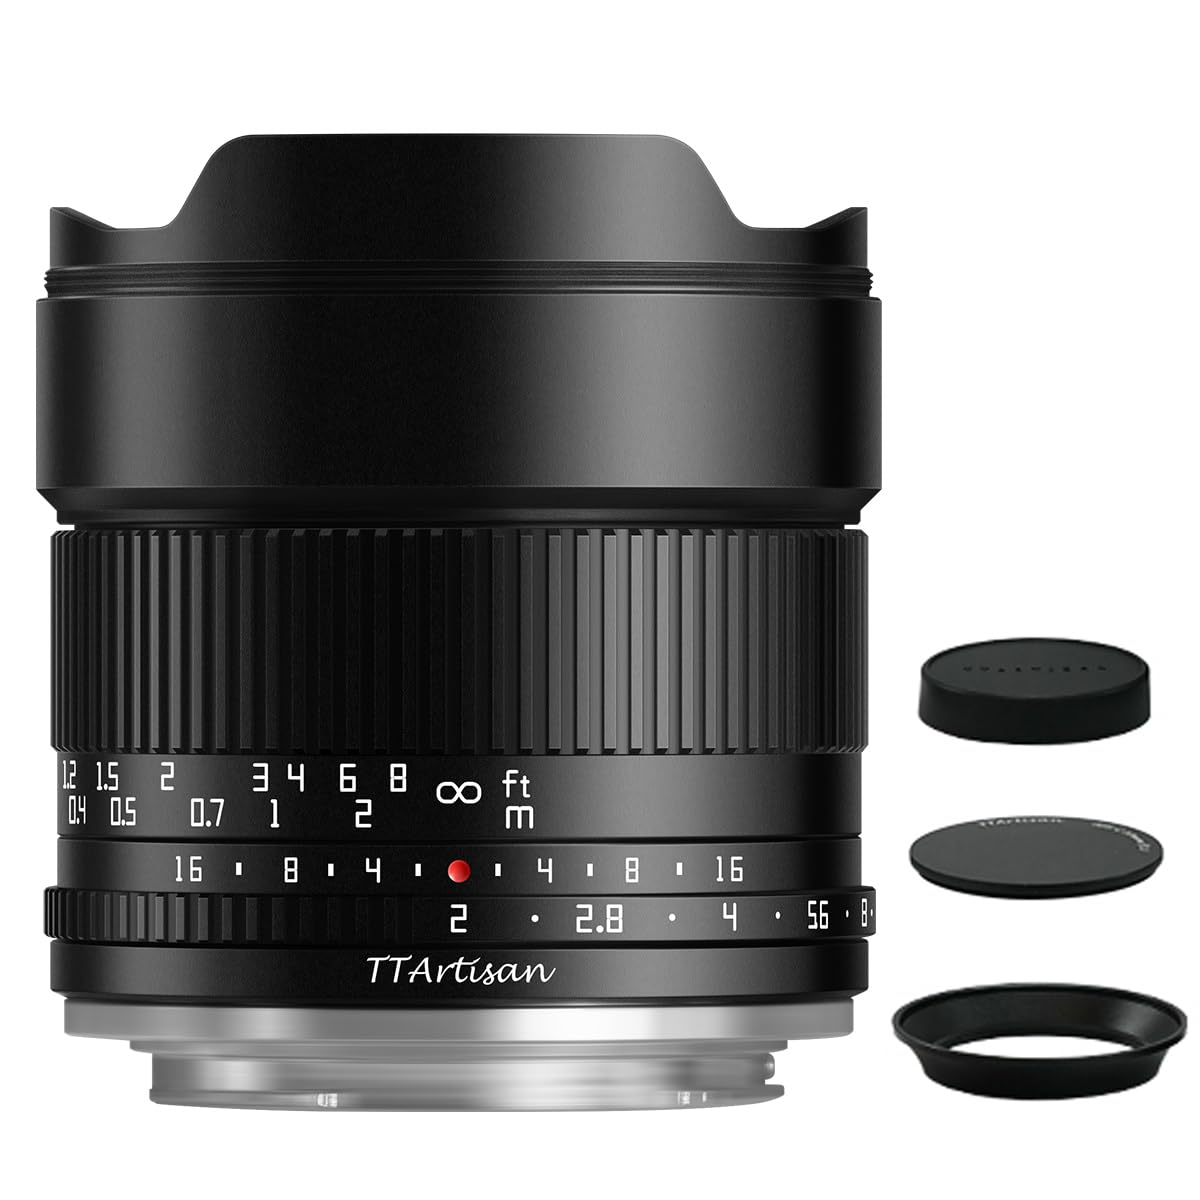 TTARTISAN 10mm F2 Ultra Wide Angle Lens APS-C Ultra-Wide Camera Lens for Fujifilm X Mount Mirrorless Cameras X-T1 X-T2 X-T3